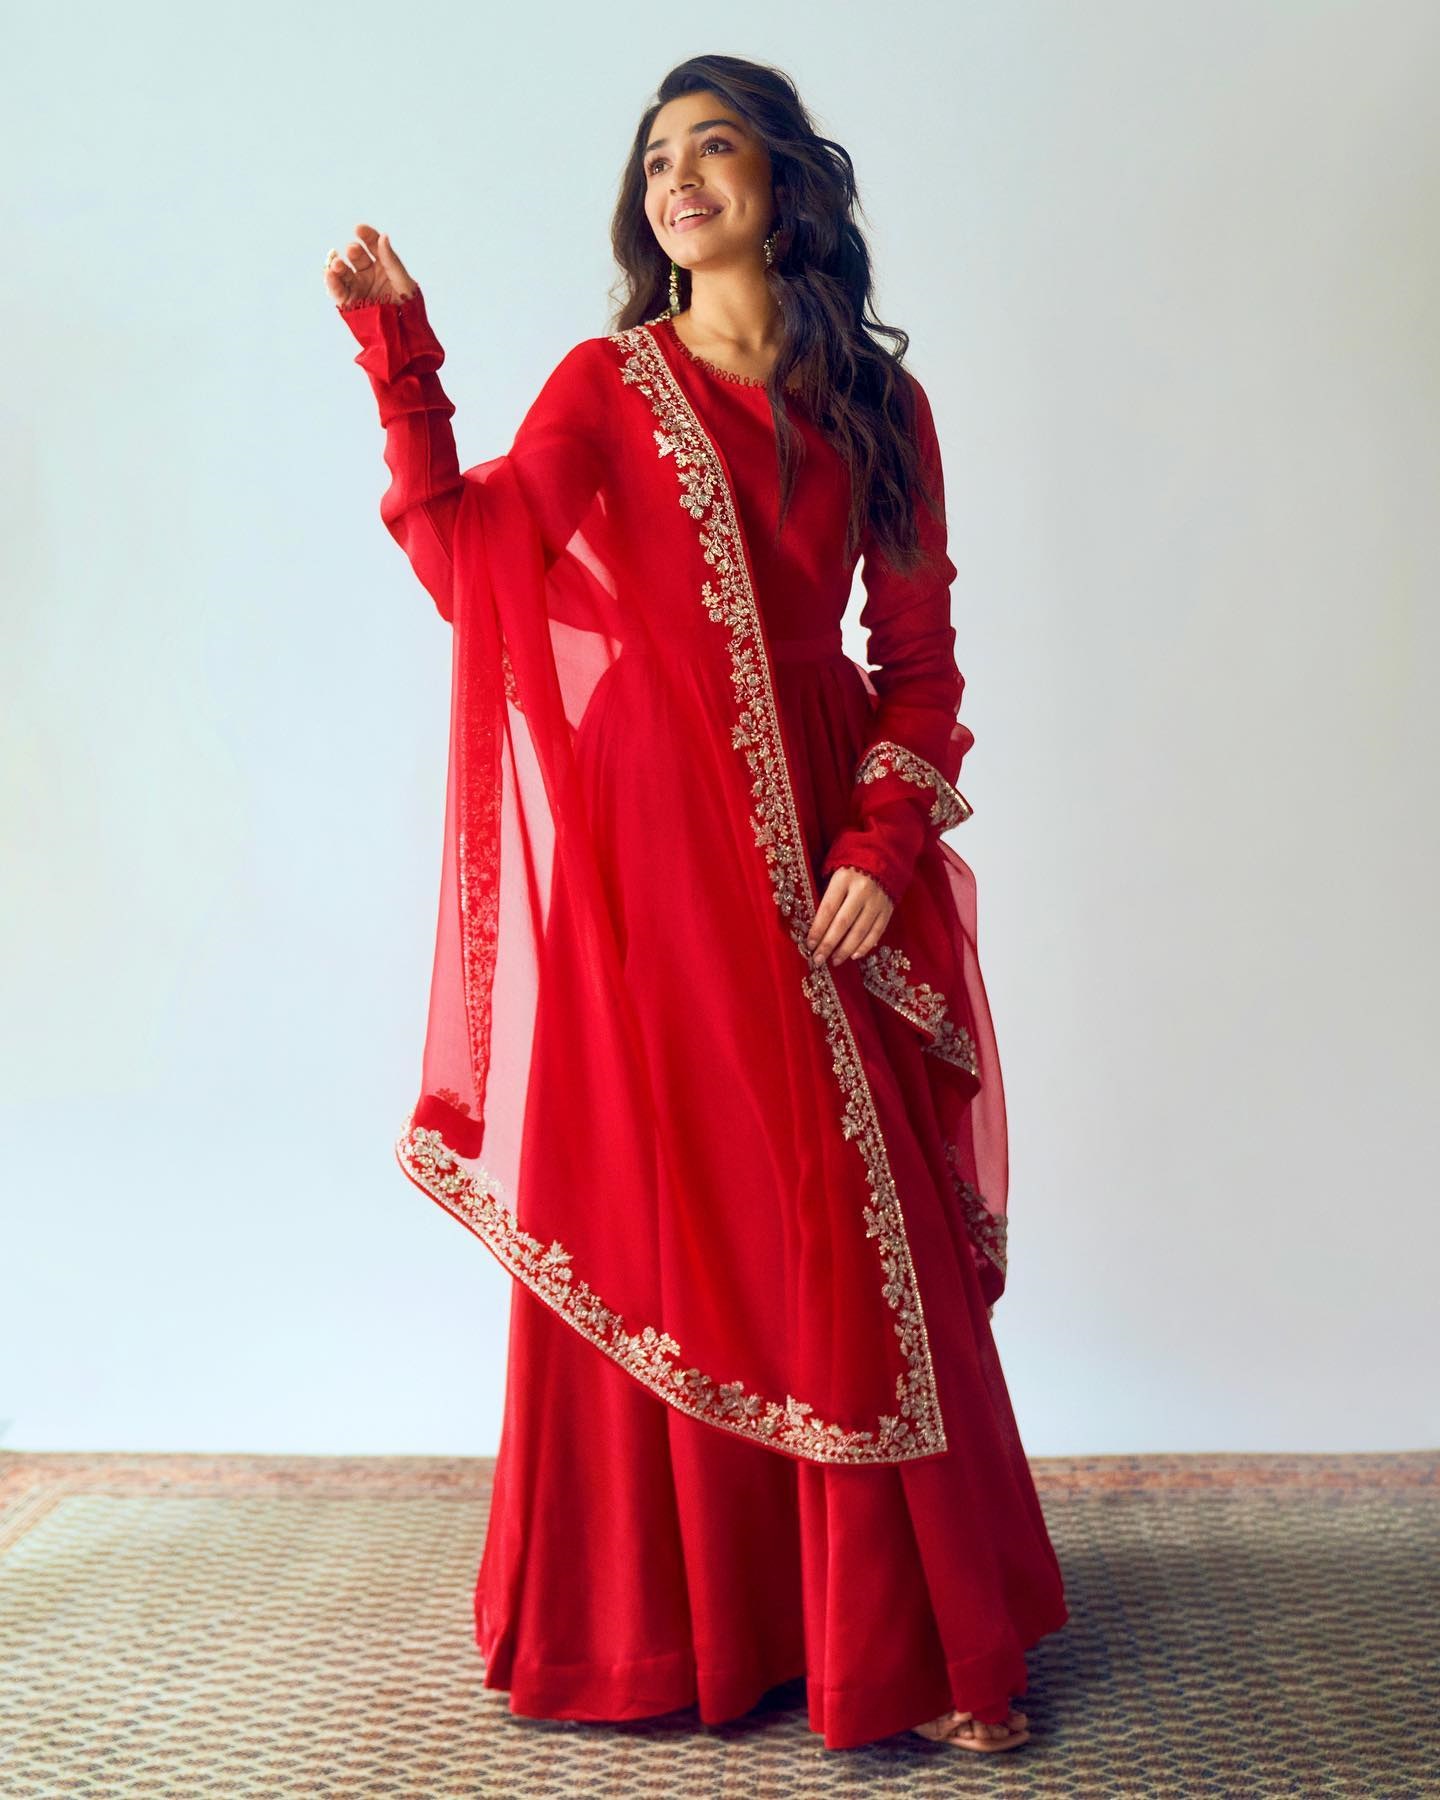 Krithi Shetty glam in red dress looking like a strawberry